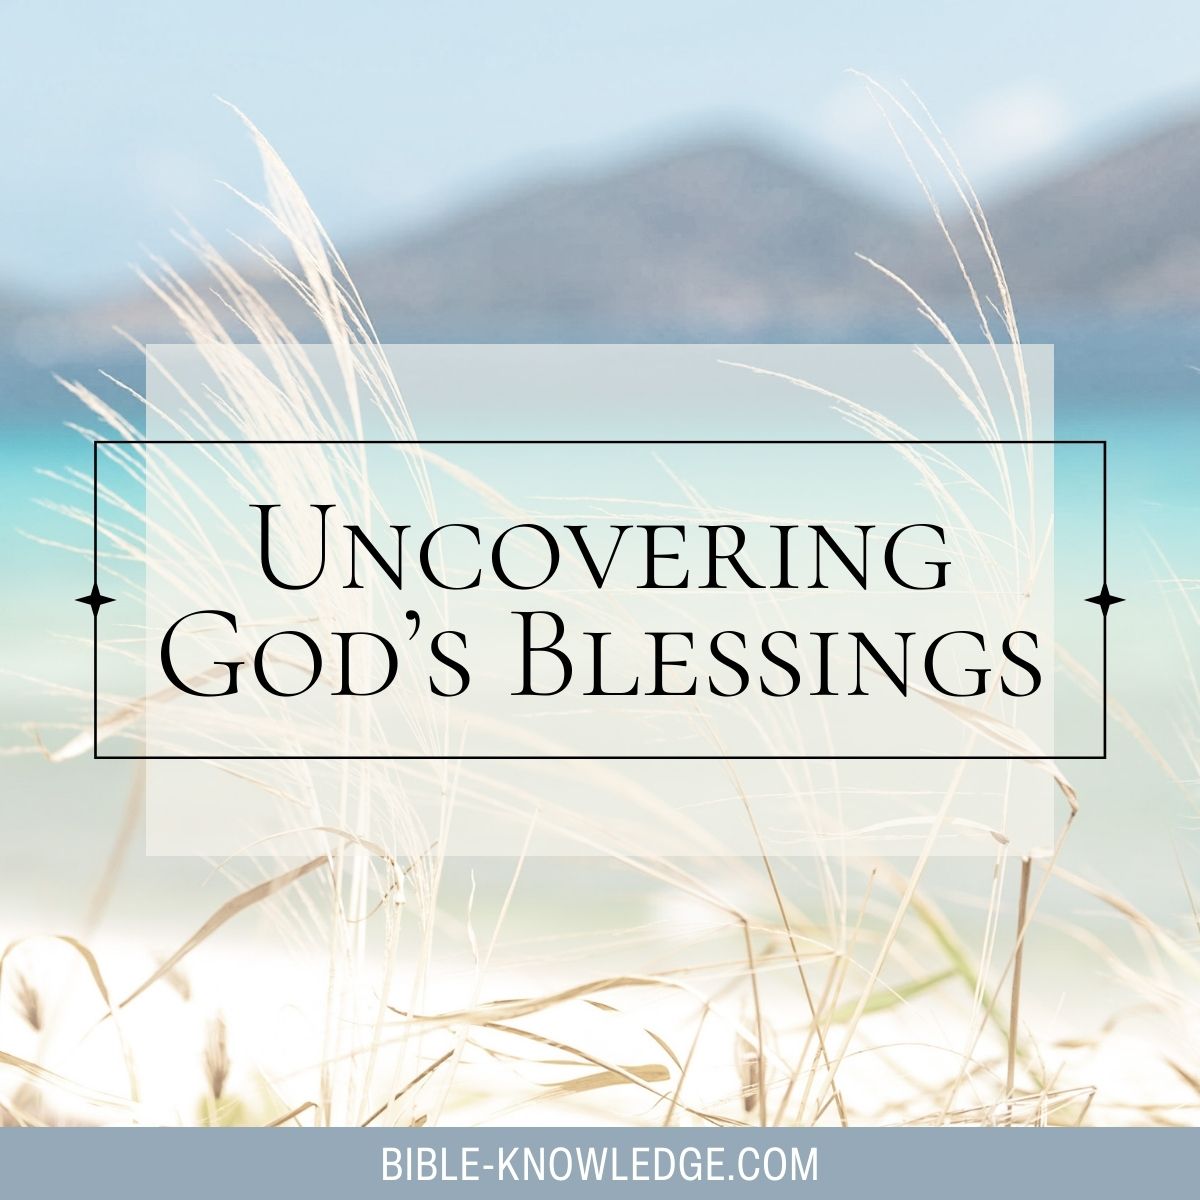 Uncovering God’s Blessings